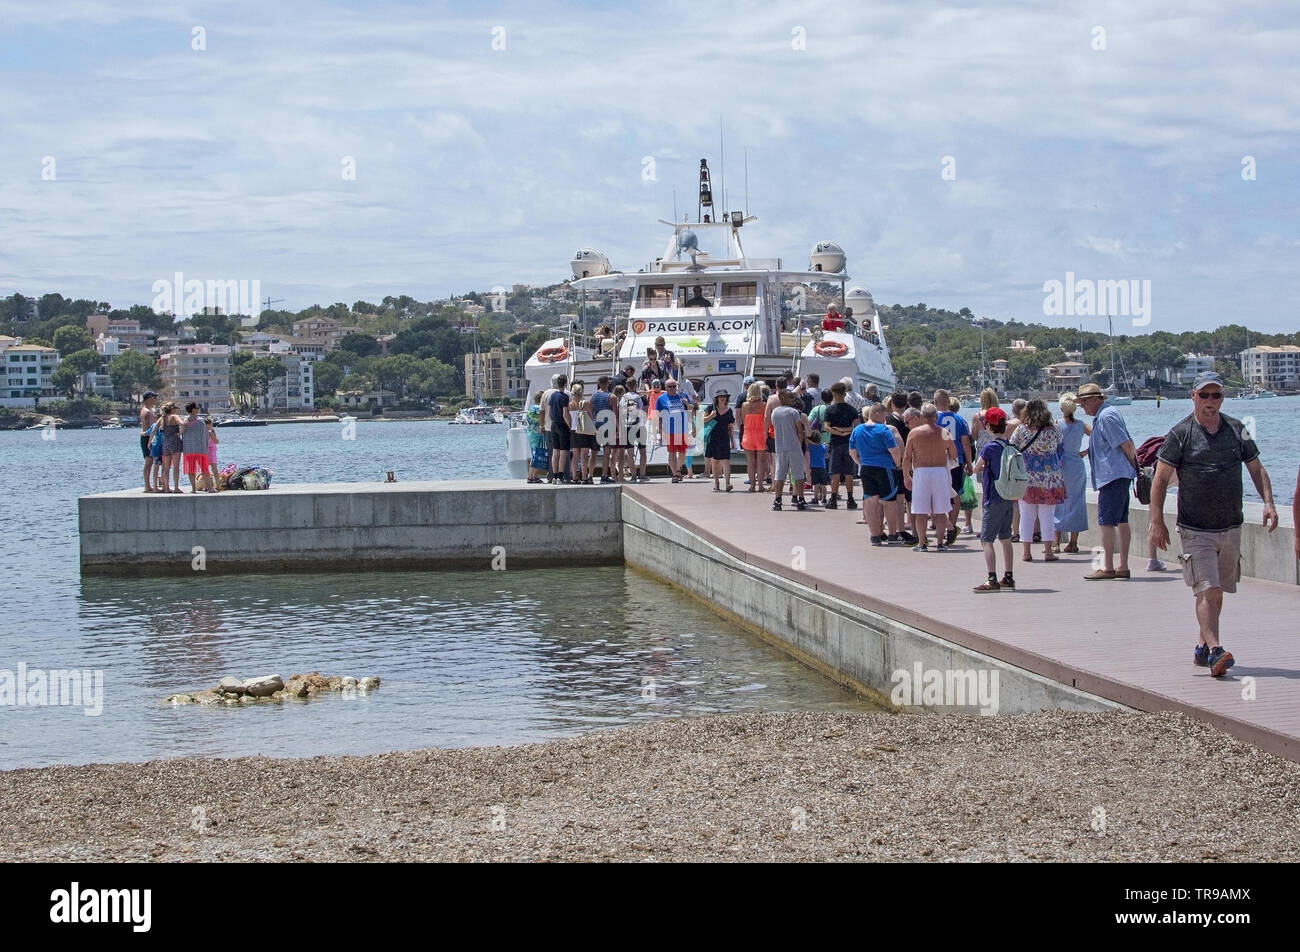 SANTA PONSA, MALLORCA, SPAIN - MAY 29, 2019: Small ferry Tropical and bridge with passengers leaving on May 29, 2019 in Santa Ponsa, Mallorca, Spain. Stock Photo